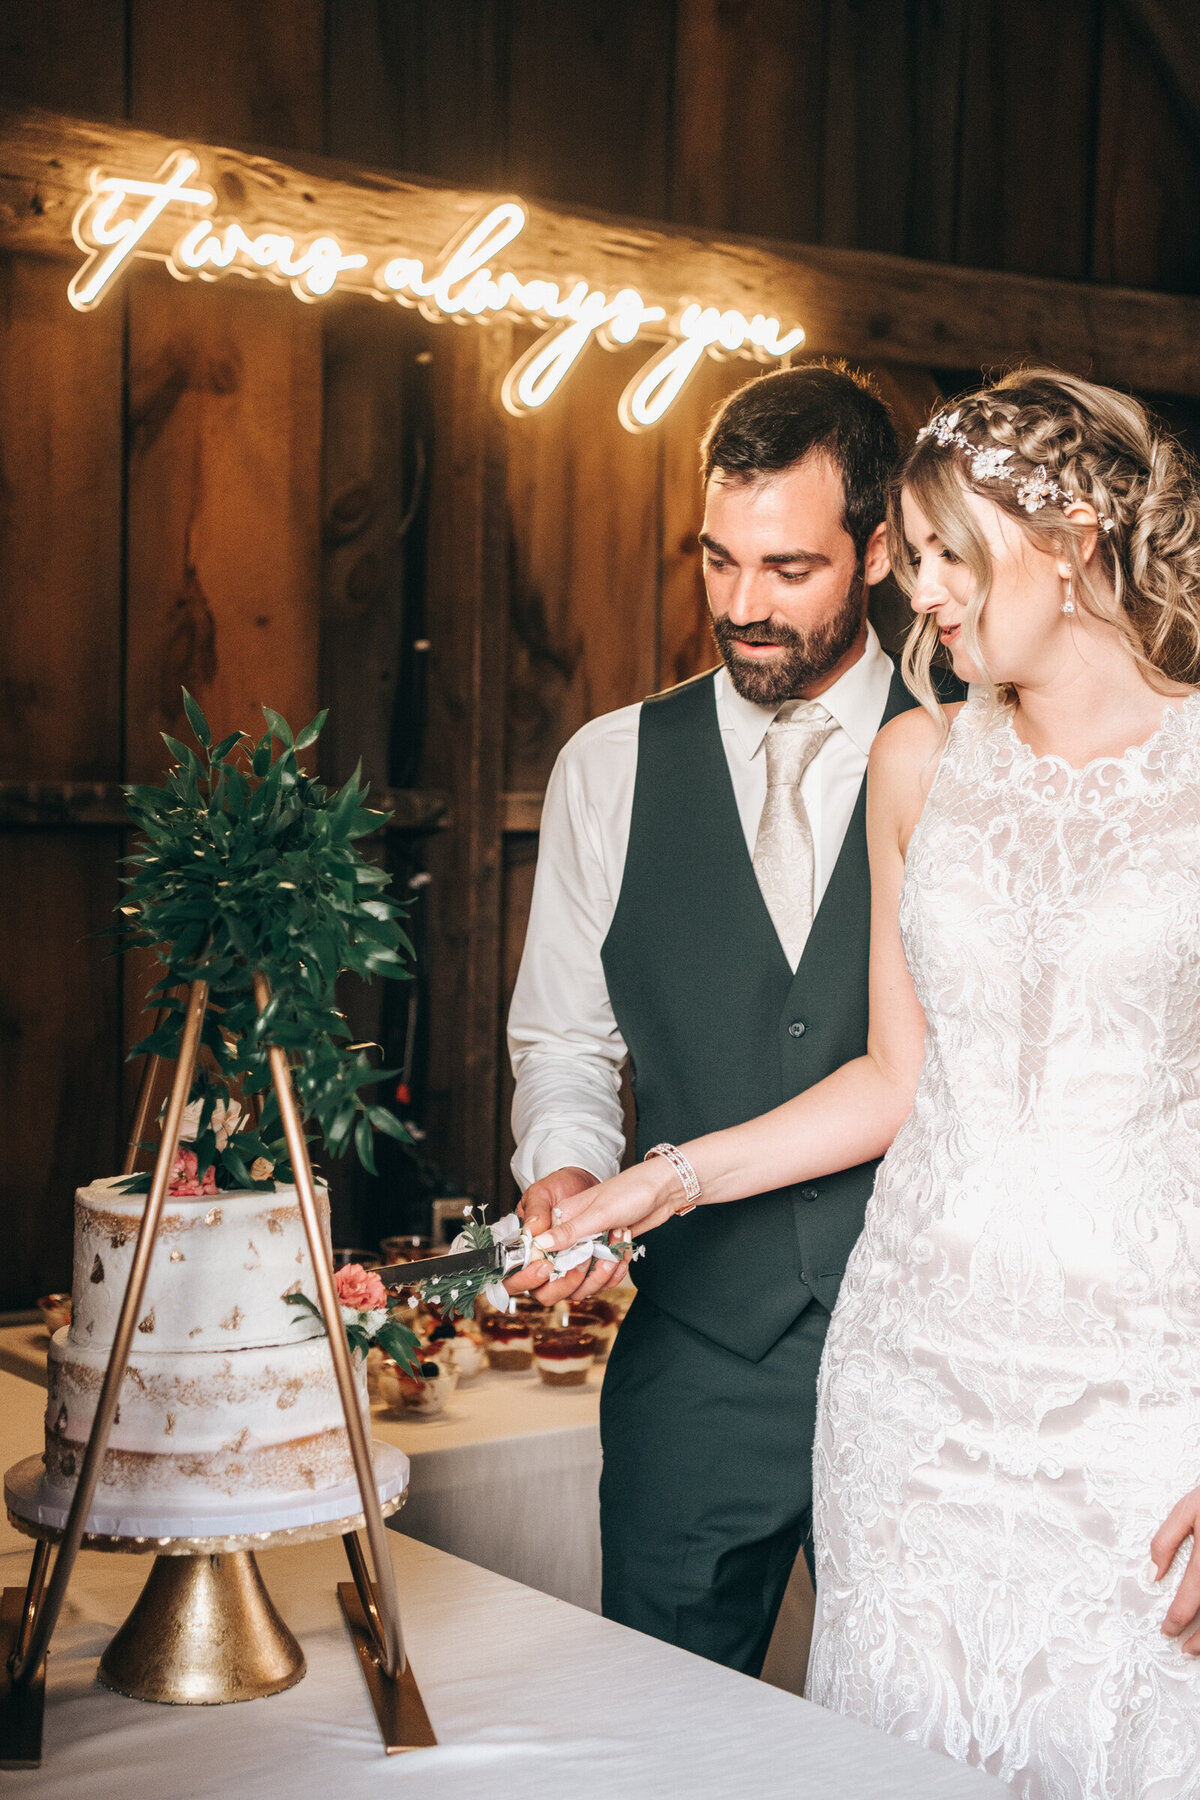 A bride and groom cutting the cake during their rustic, chic barn wedding